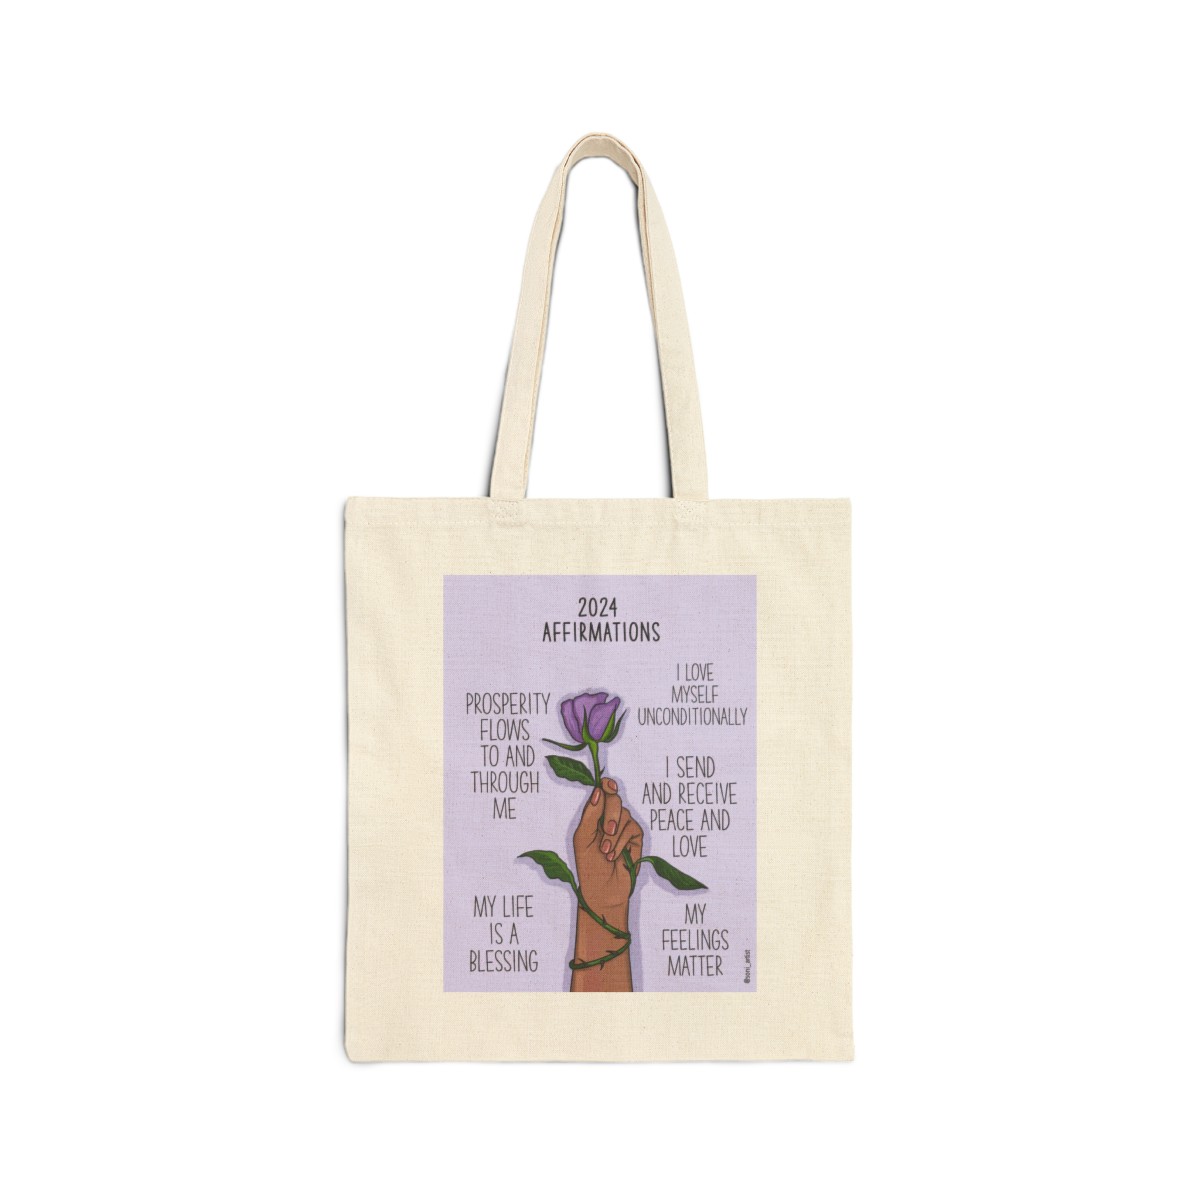 "2024 affirmations" Cotton Canvas Tote Bag product thumbnail image